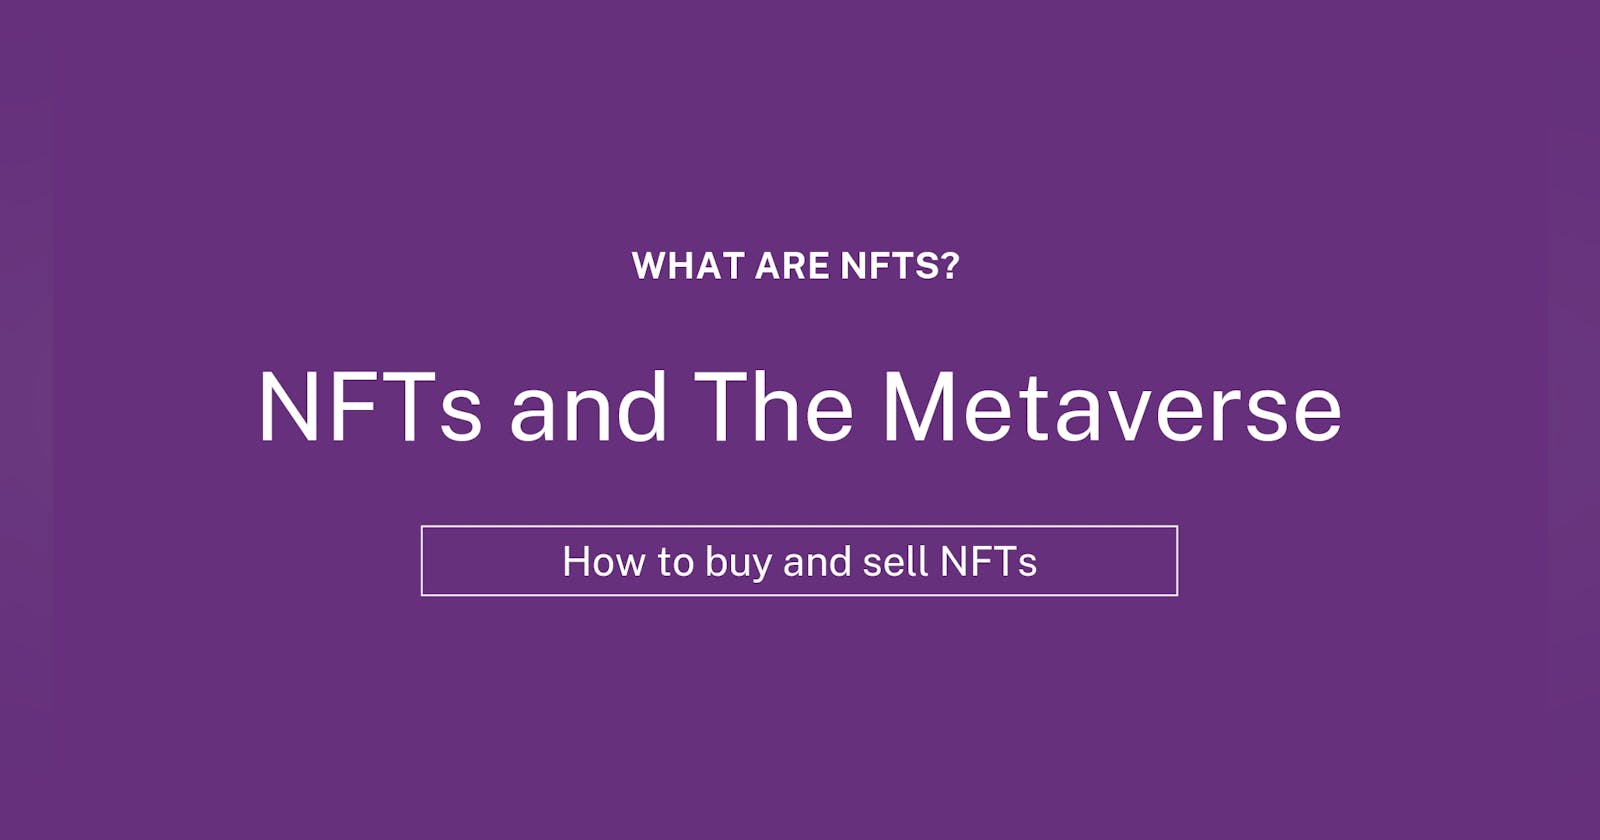 NFTs and The Metaverse